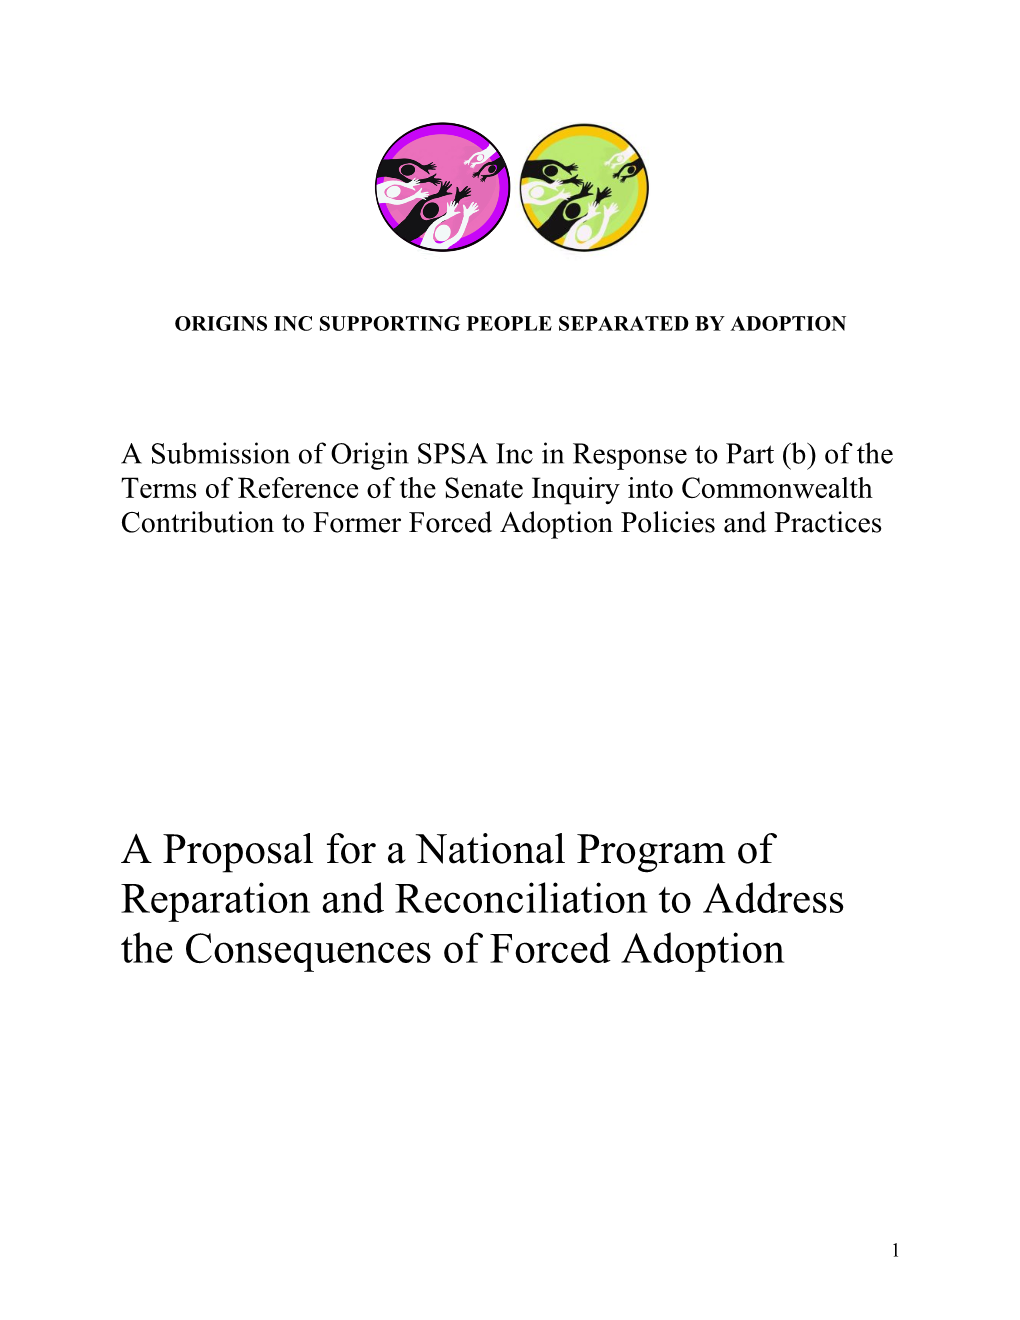 Proposal for a National Program of Reparation and Reconciliation-1